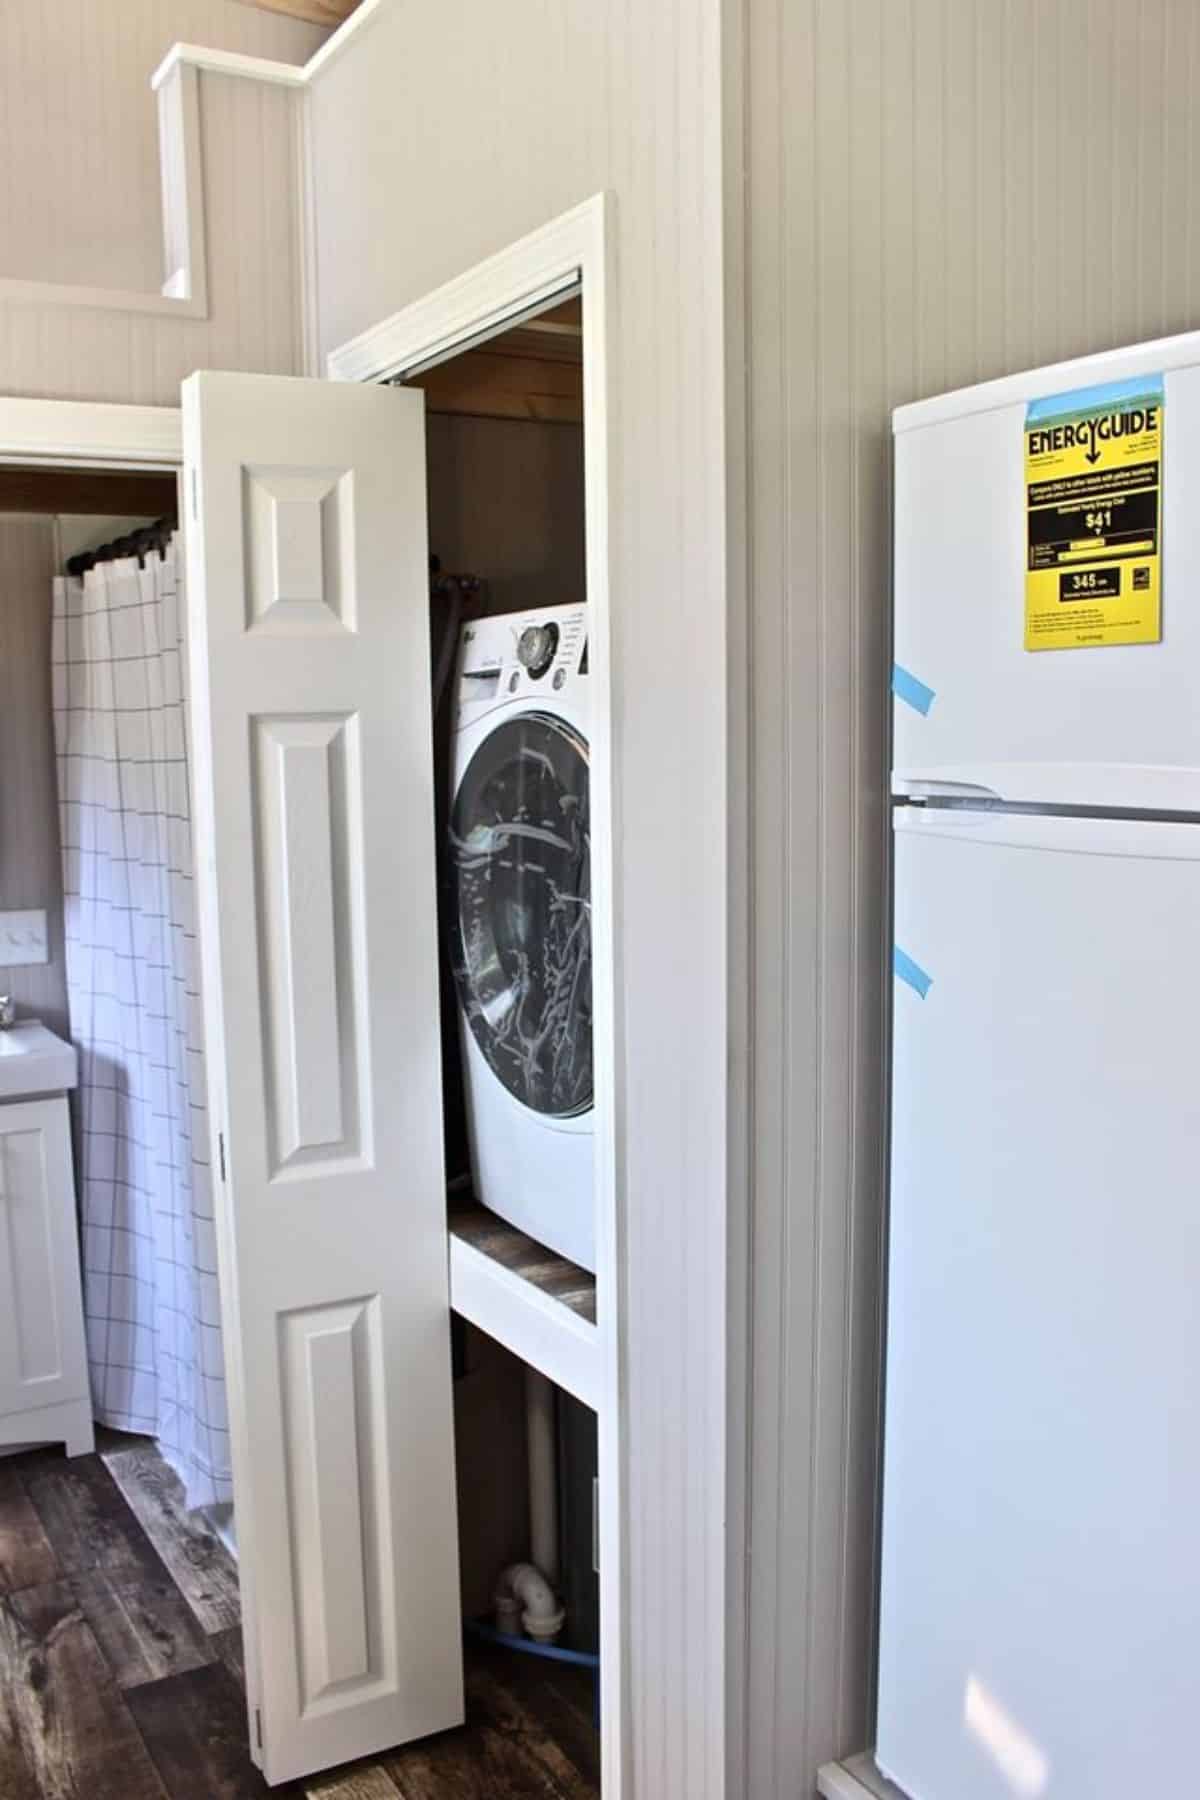 Washer dryer combo included in the deal